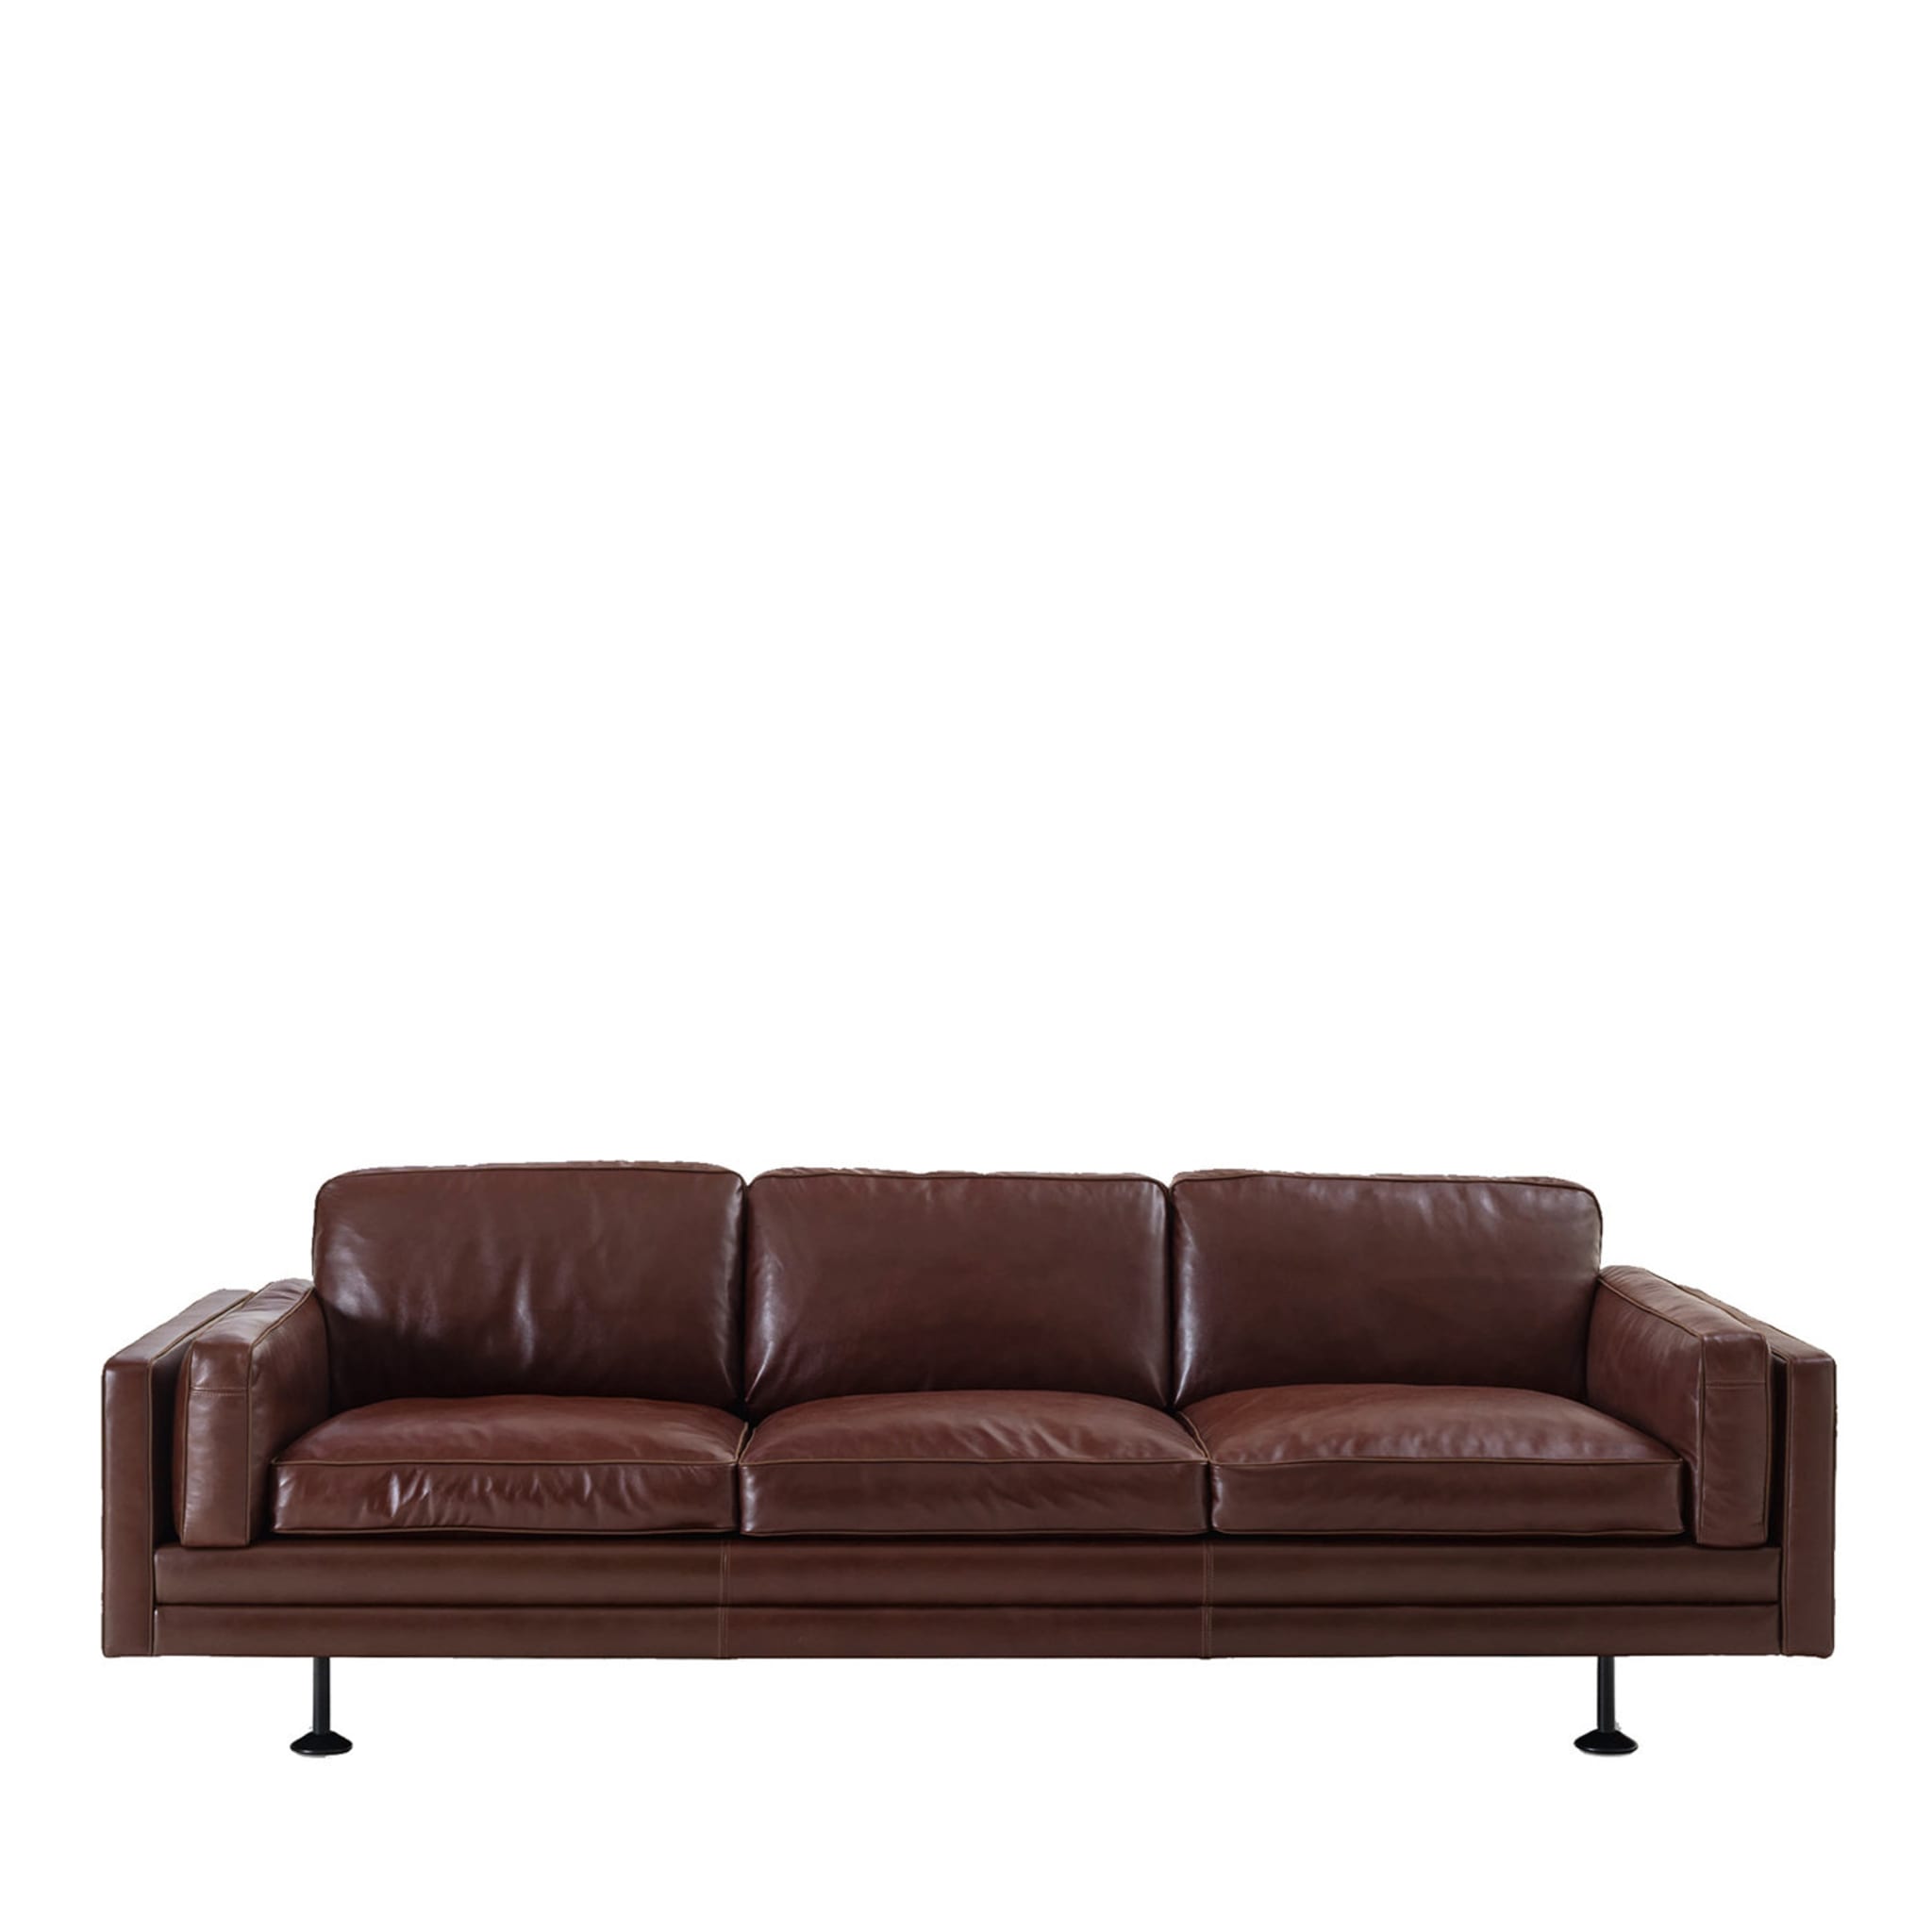 Quinto leather sofa - Main view